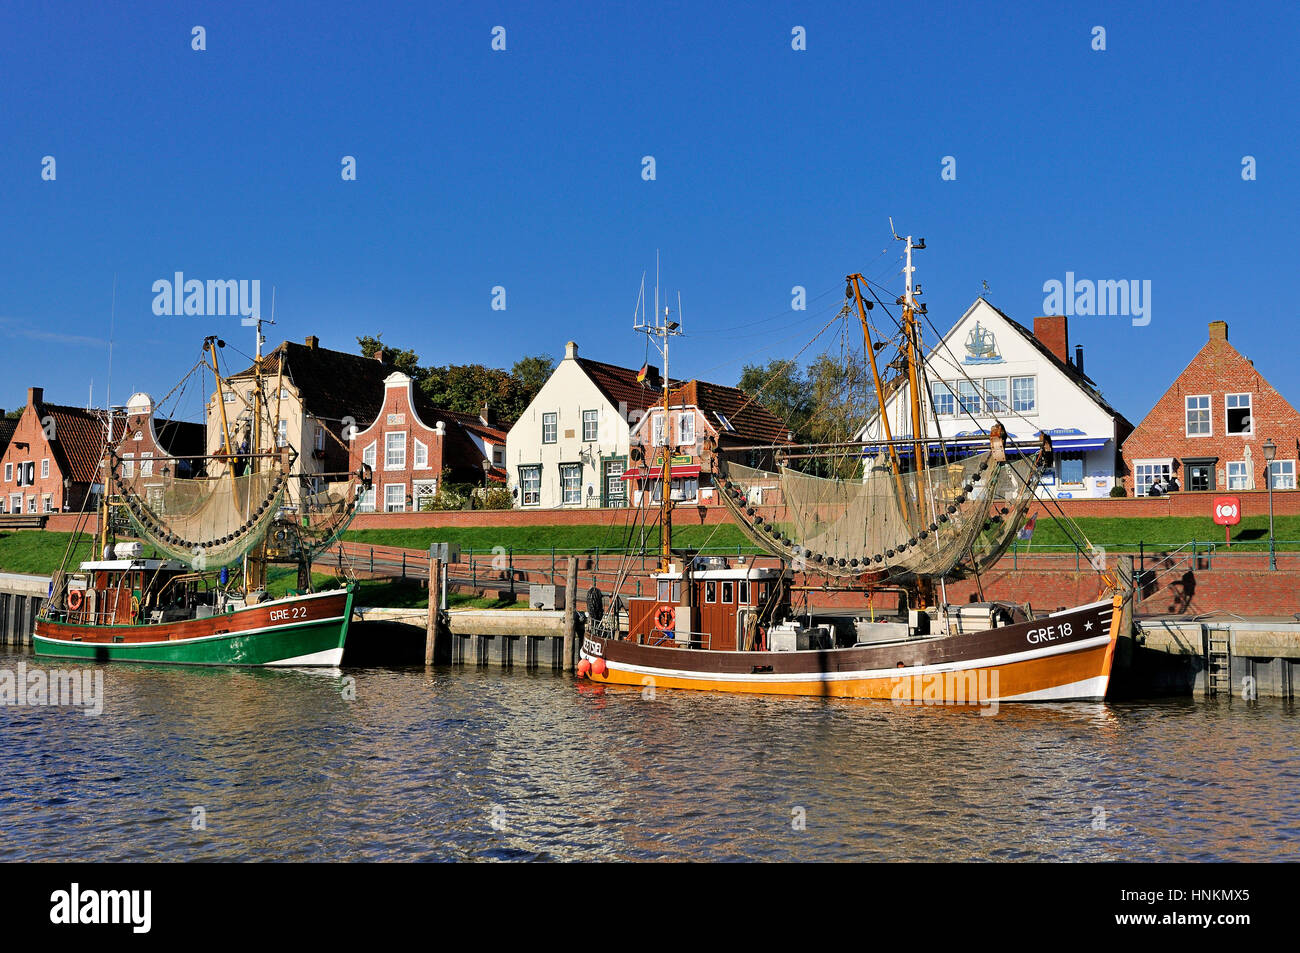 Crab cutters in the harbor, in front of historical buildings, Greetsiel, Lower Saxony, Germany Stock Photo